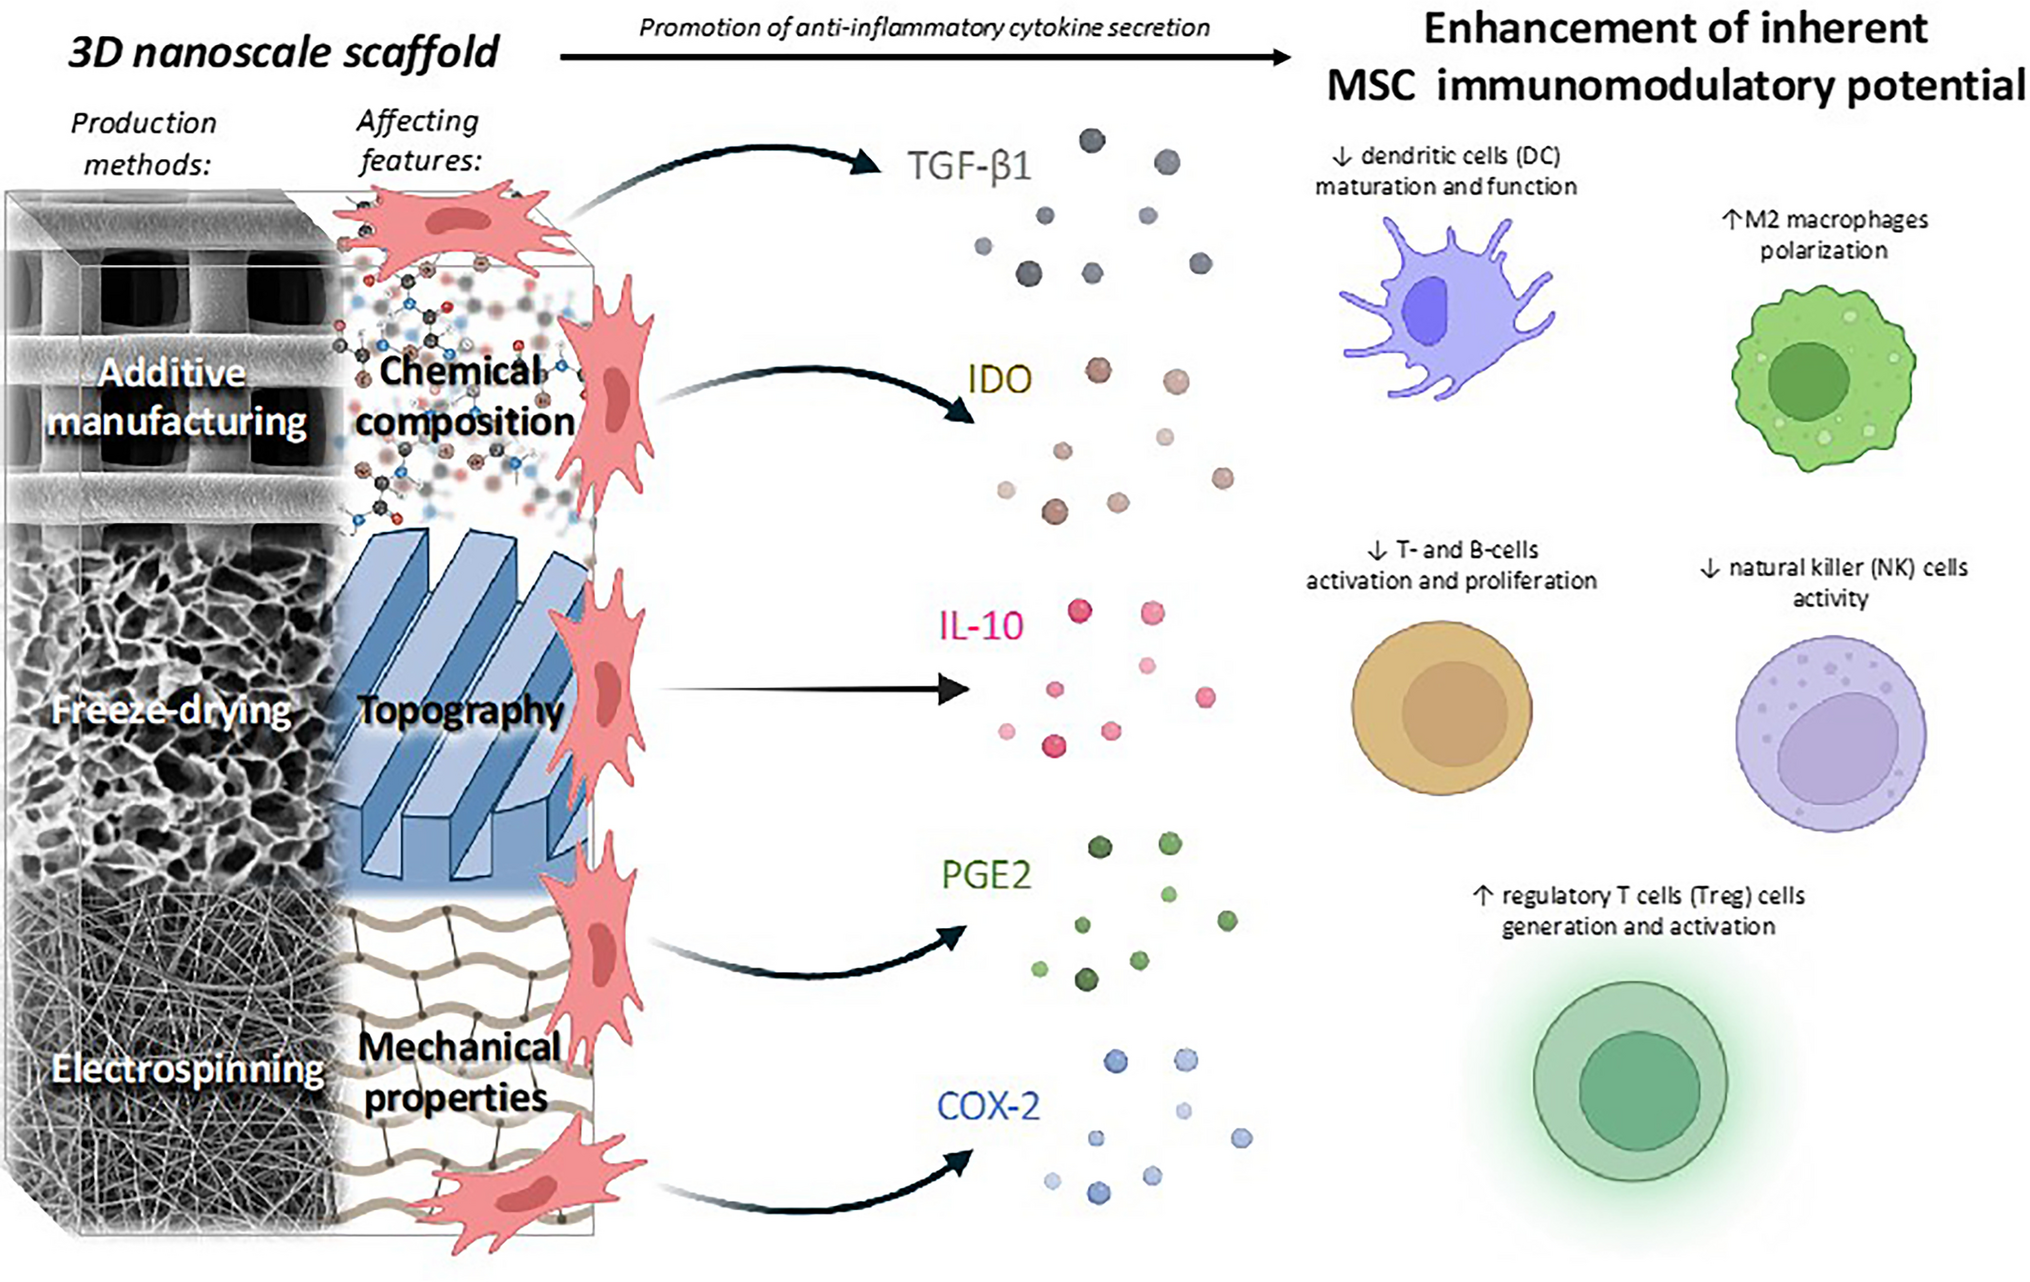 Mesenchymal Stromal Cell Immunomodulatory Potential for Orthopedic Applications can be fine-tuned via 3D nano-engineered Scaffolds